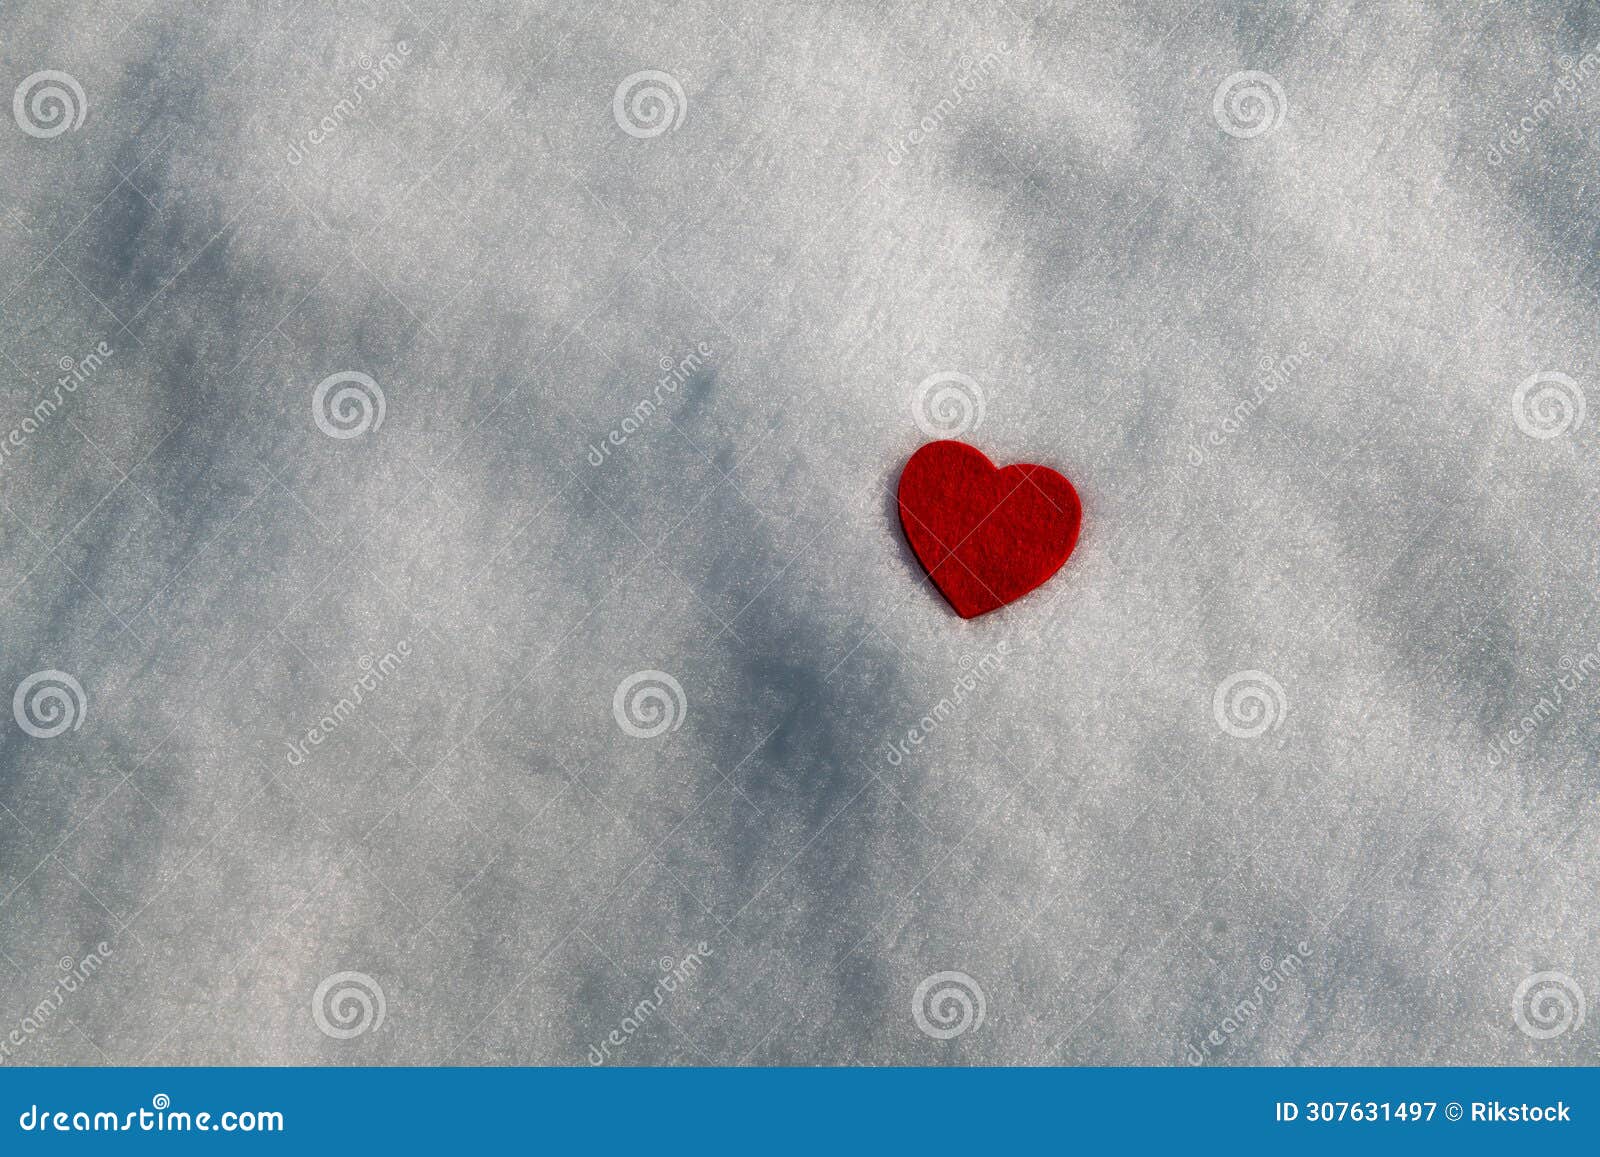 heart of fabric in the pure white snow. in february, in the mountains with snow, you can celebrate the valentine's day